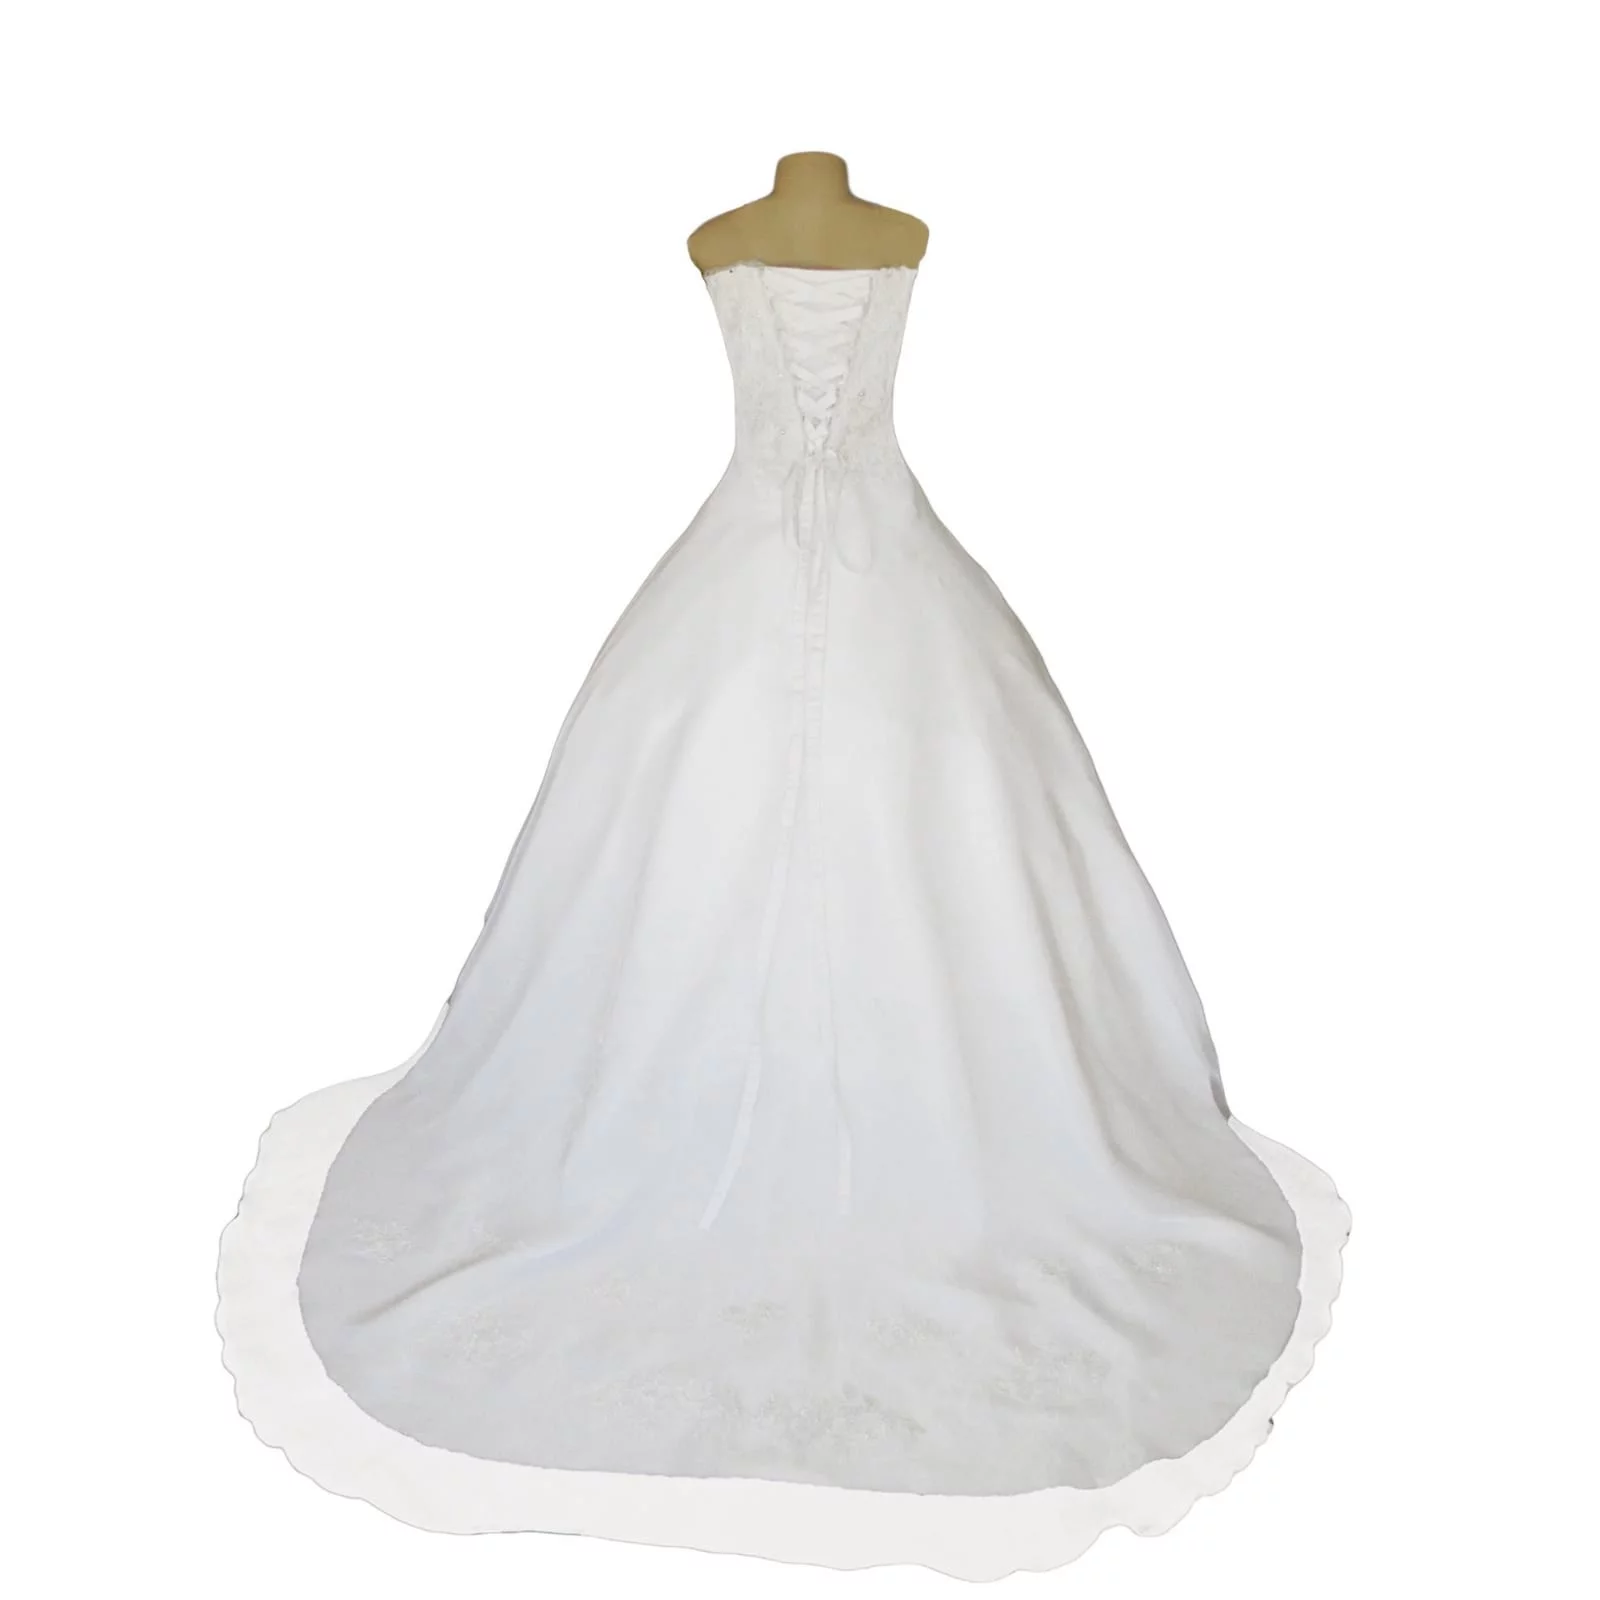 White organza a-line boob tube custom made wedding ball gown 7 white, organza, a-line, boob tube, custom-made wedding ball gown. Bodice detailed with lace. Lace-up back. With a train & removable off-shoulder pleated organza straps detailed with lace. With shimmer blush length veil.